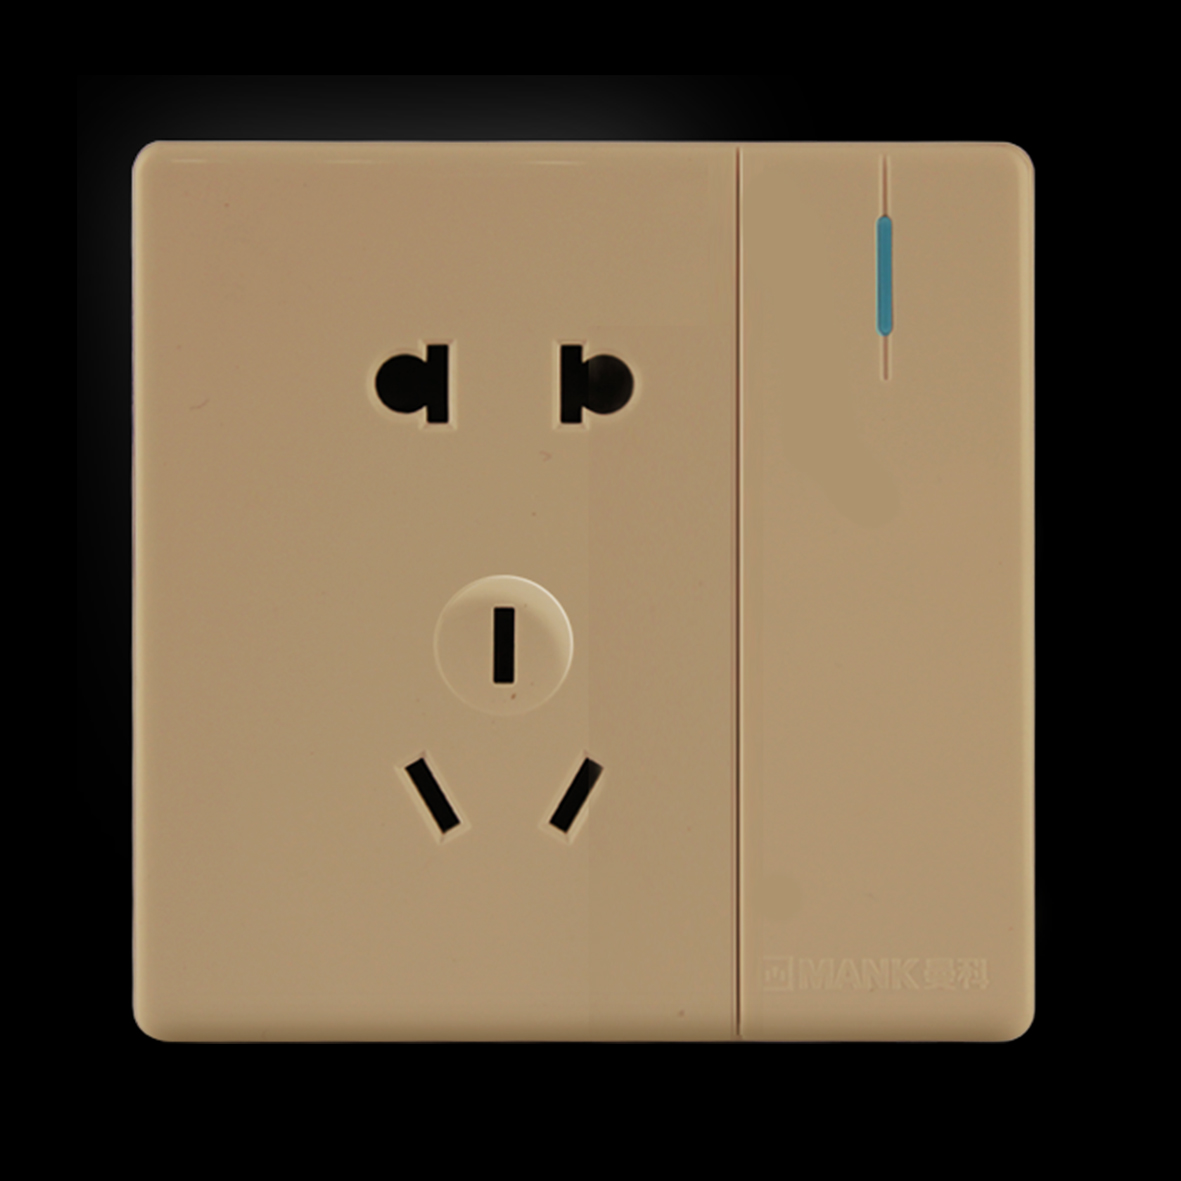 Meijia_A large board switch two or three pole socket (Knight Gold)